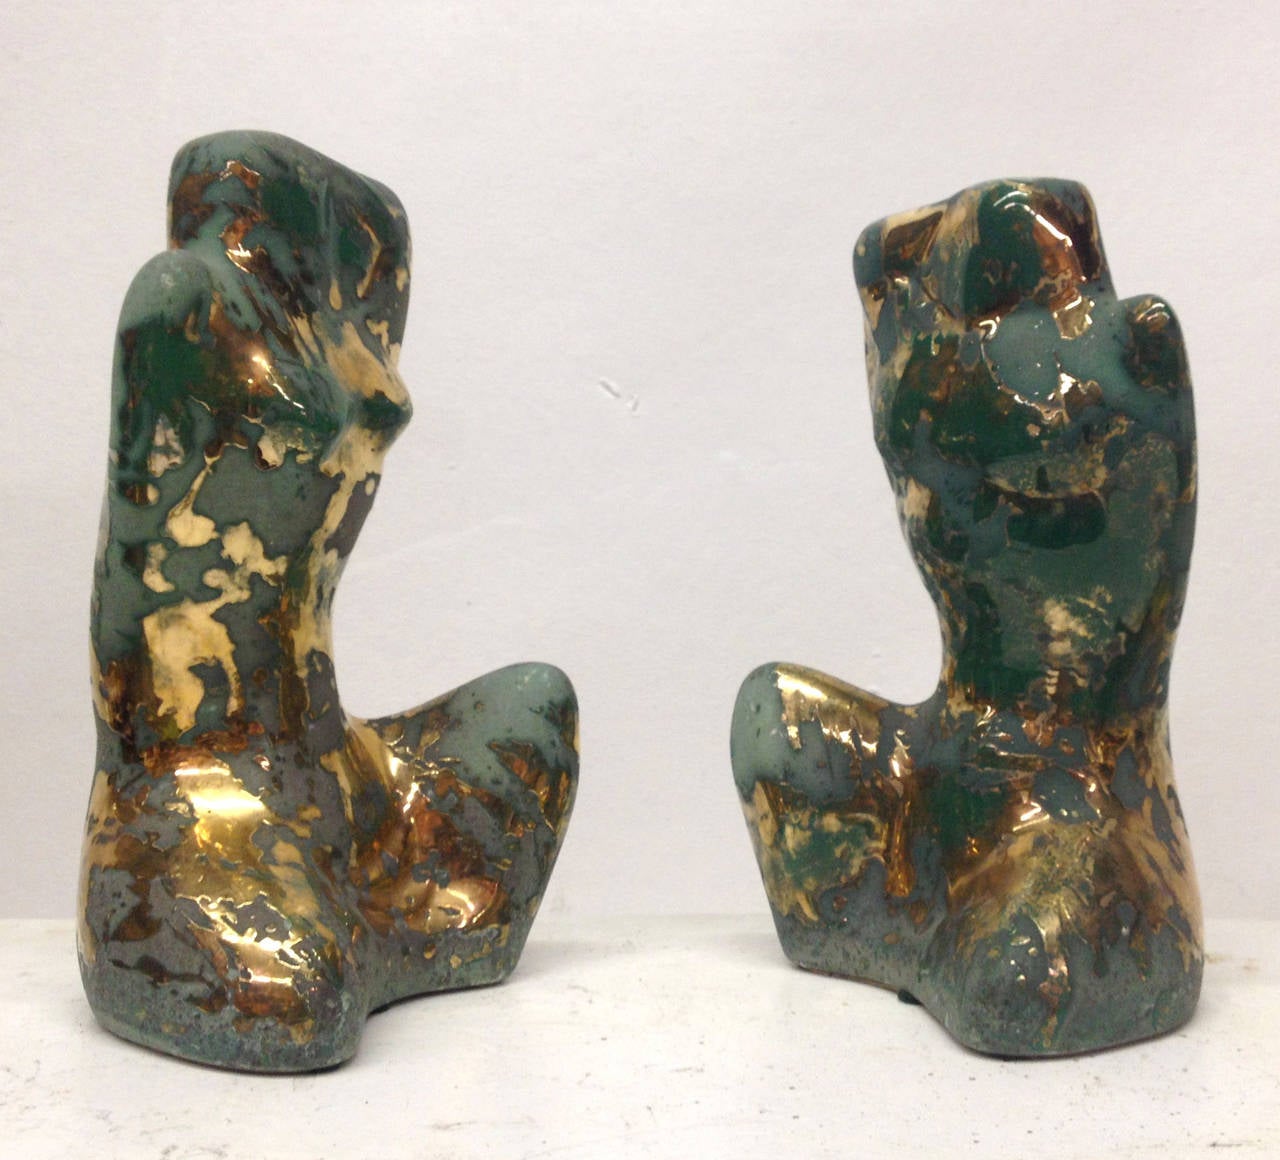 American Gilded and Oxidized Man and Woman Sculptures